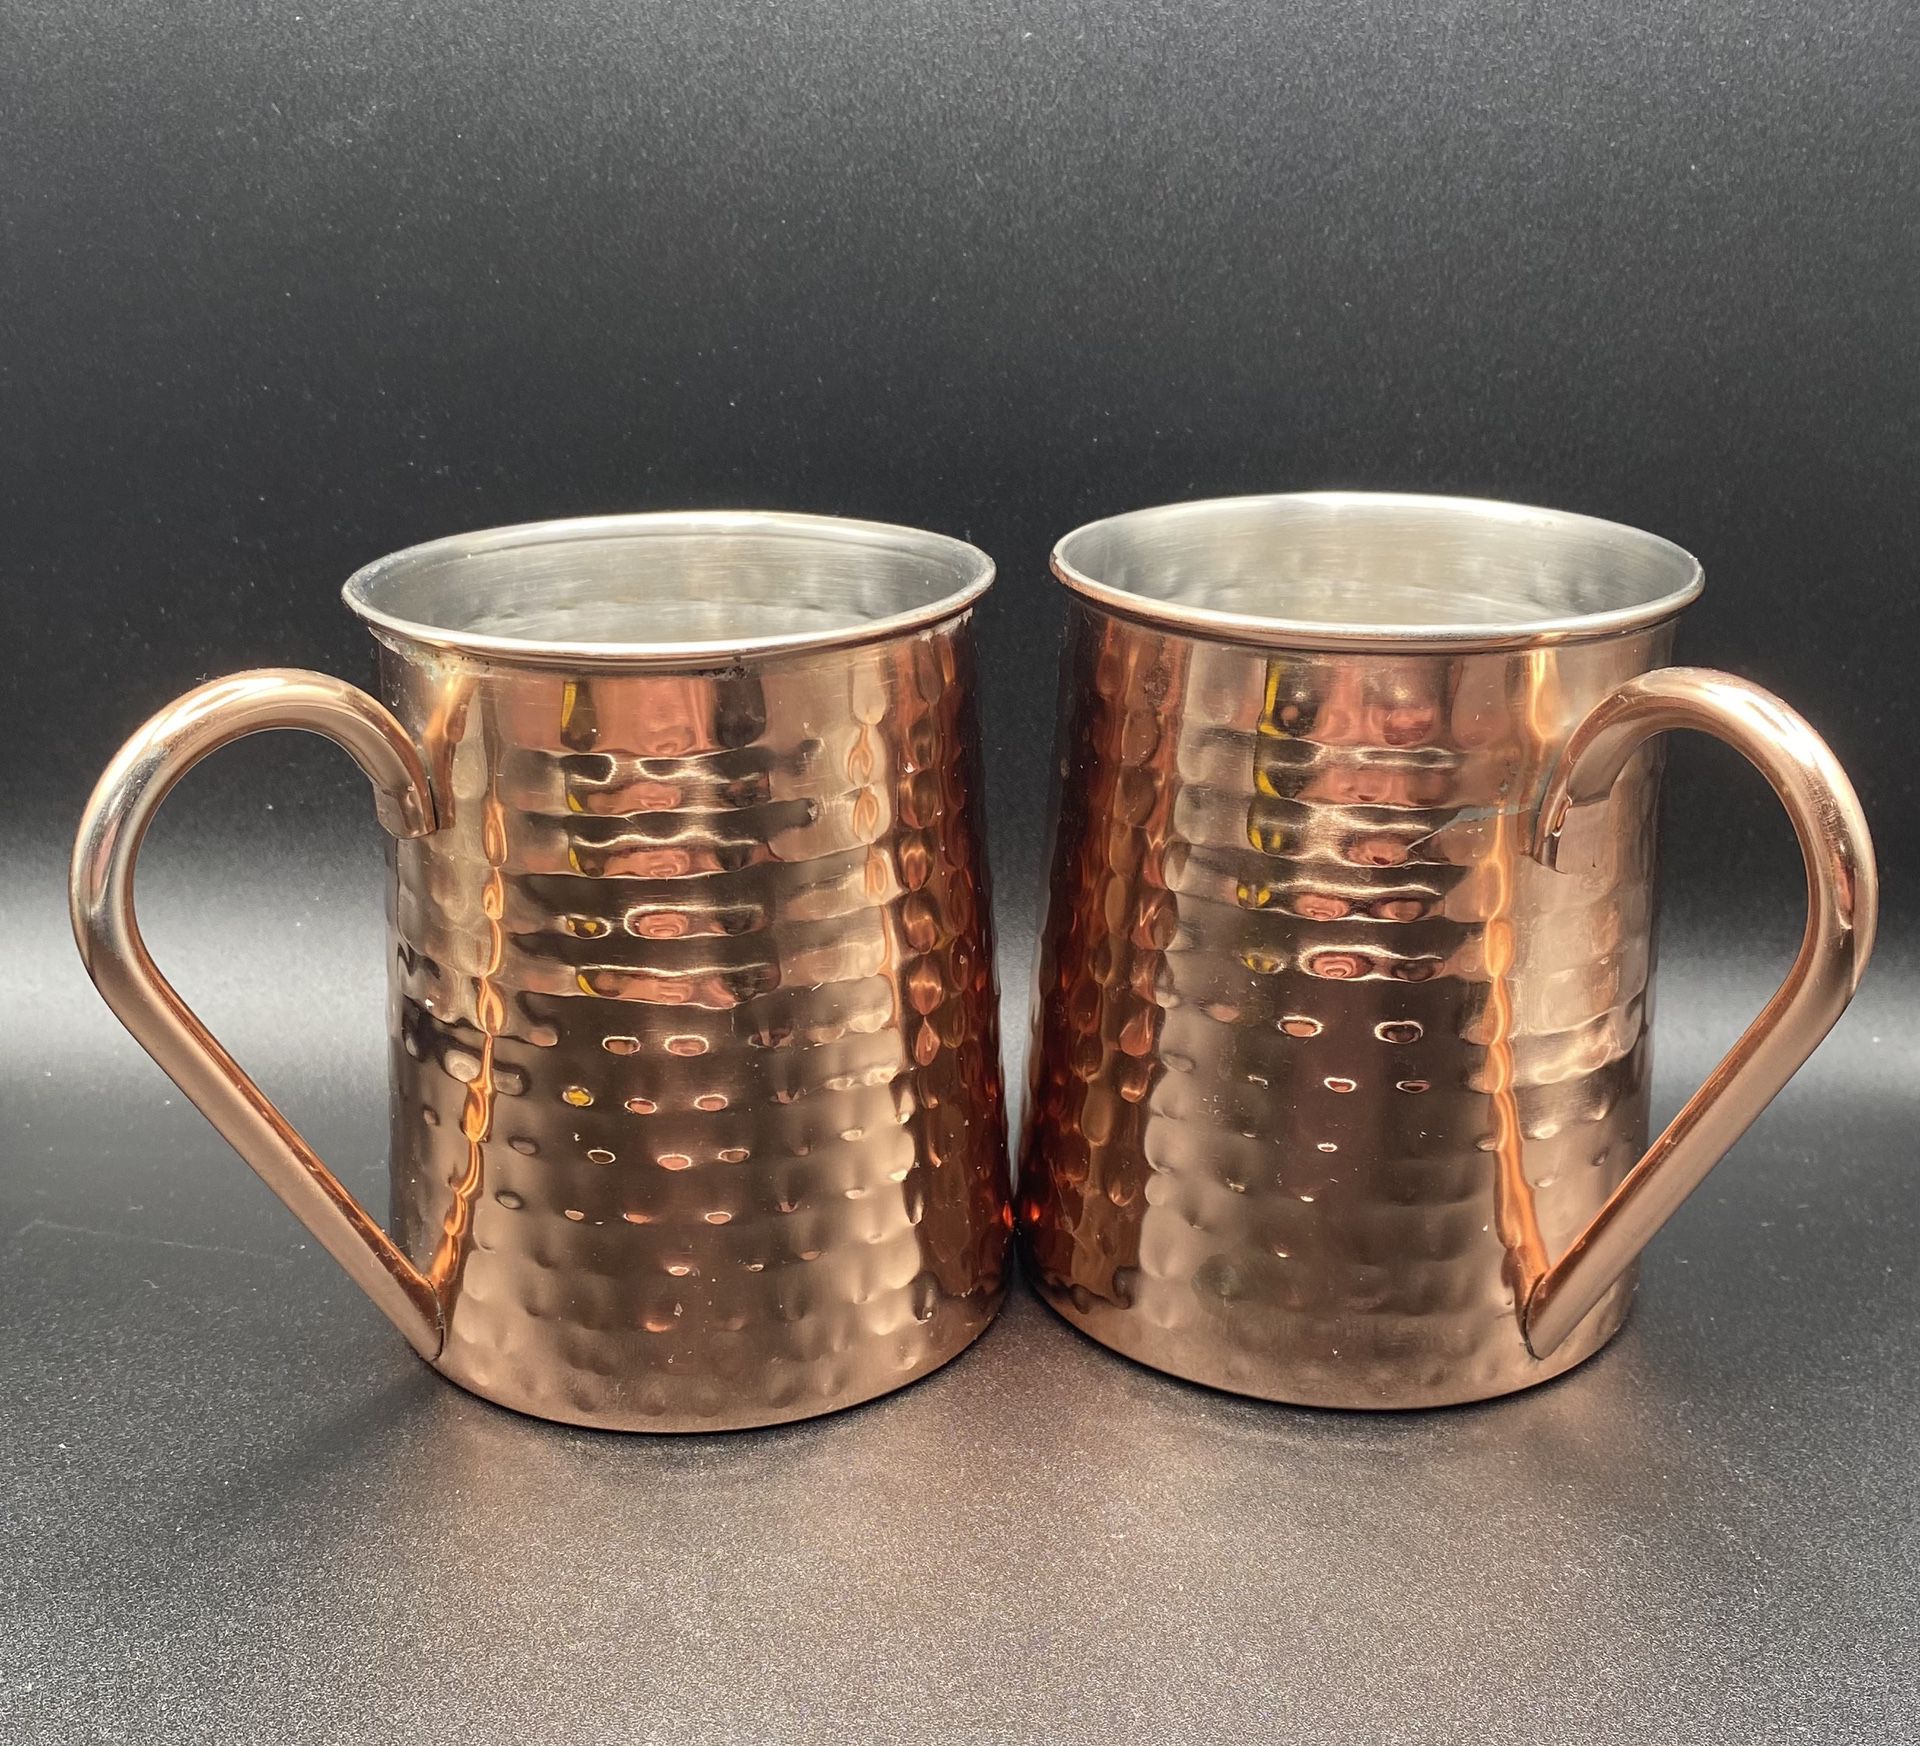 Two 25oz Stainless Steel/Copper  Hammered Threshold Moscow Mule Mugs